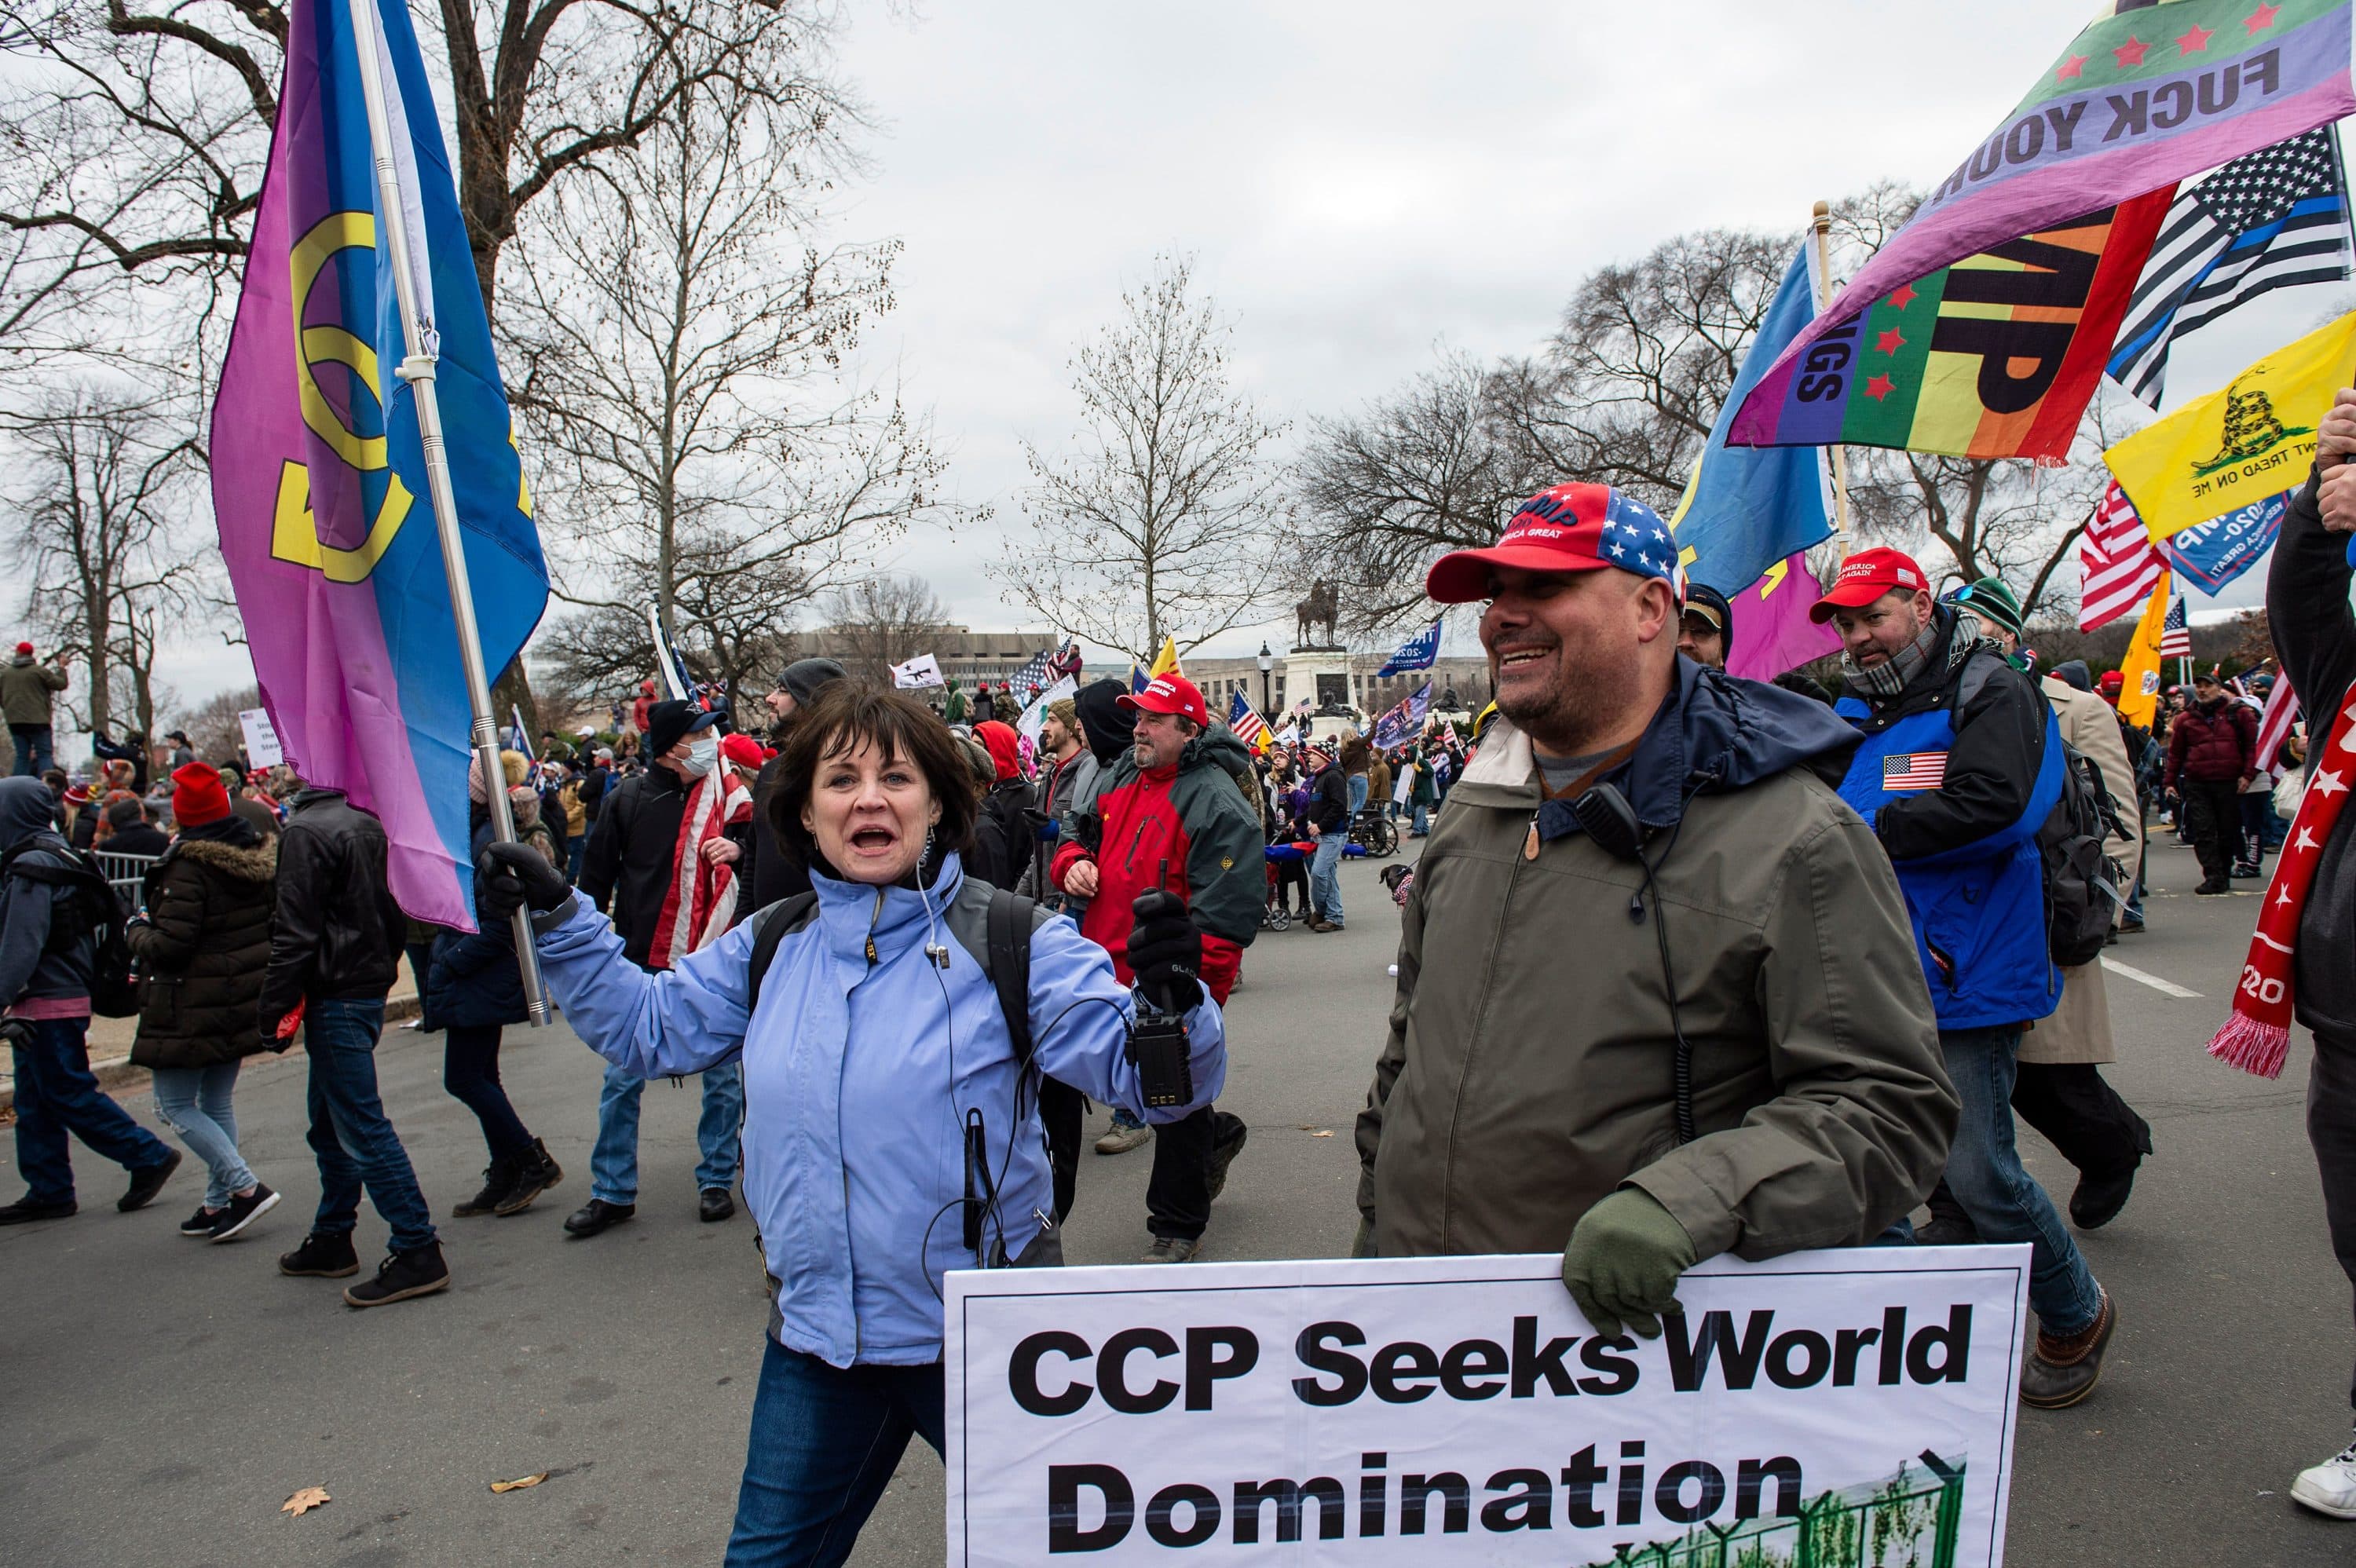 Natick Town Meeting member Suzanne Ianni and Mark Sahady march through the streets of Washington, D.C., before they allegedly stormed the Capitol building on Jan. 6. (Joseph Prezioso/AFP via Getty Images)